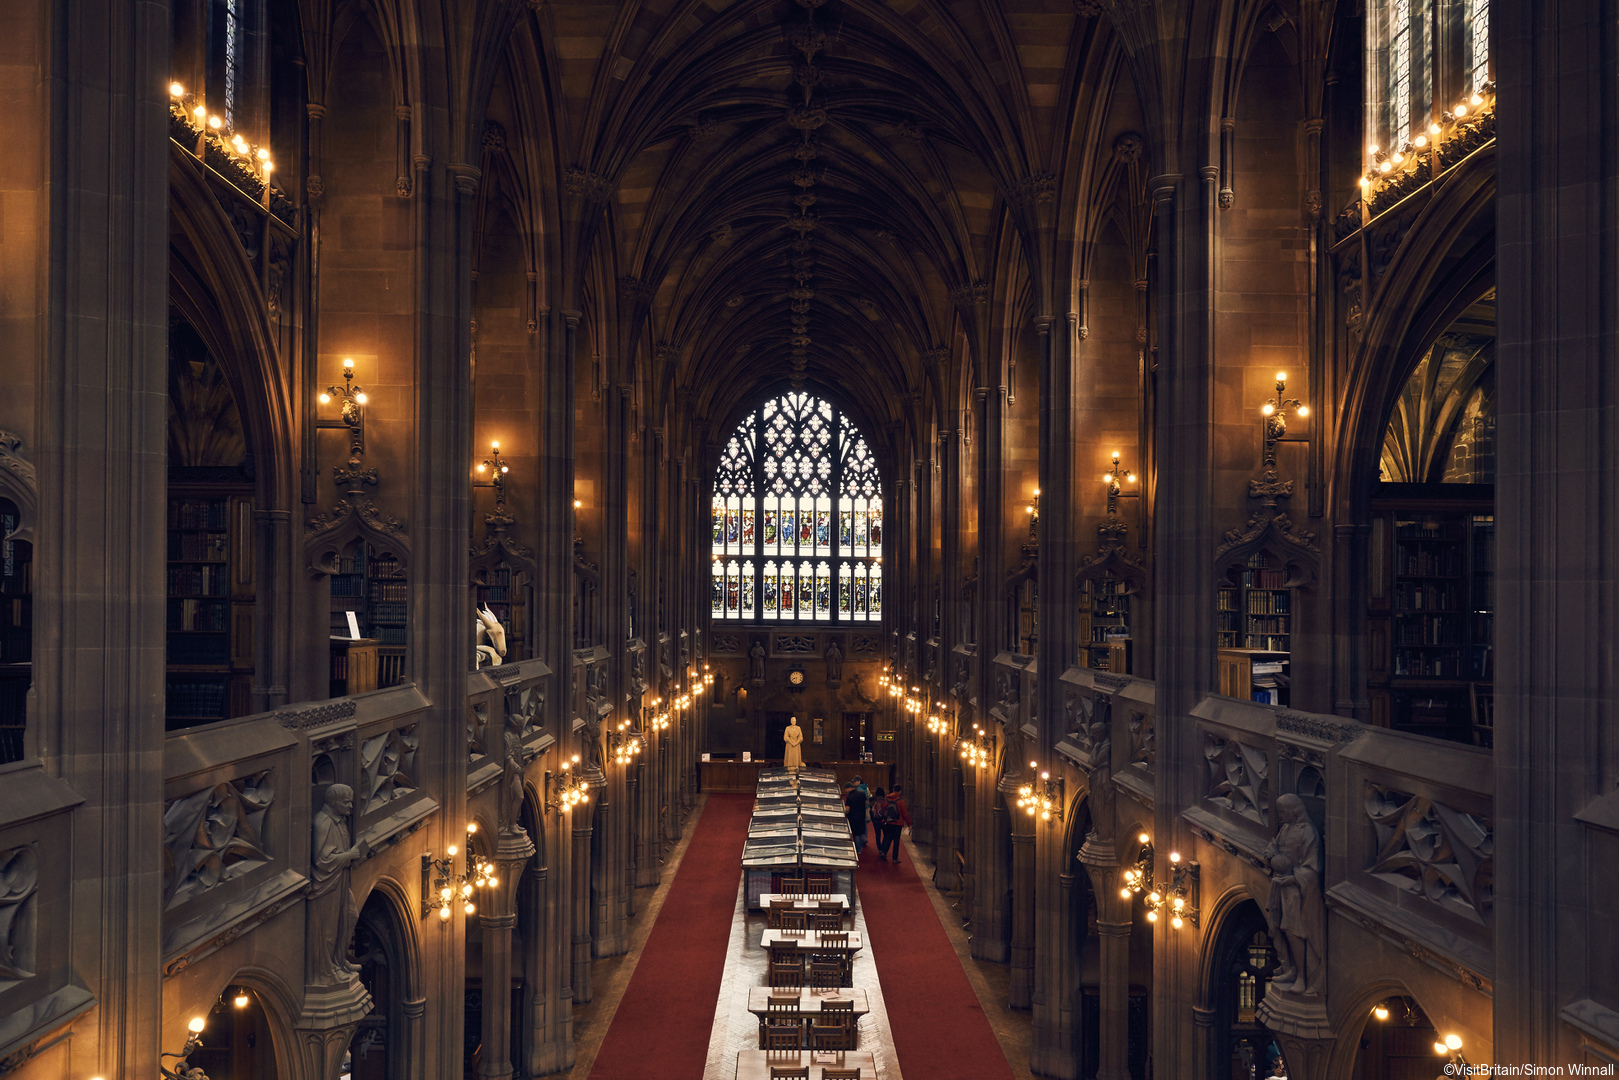 Interior view of the neo-gothic Reading Room at the John Rylands Library, University of Manchester.